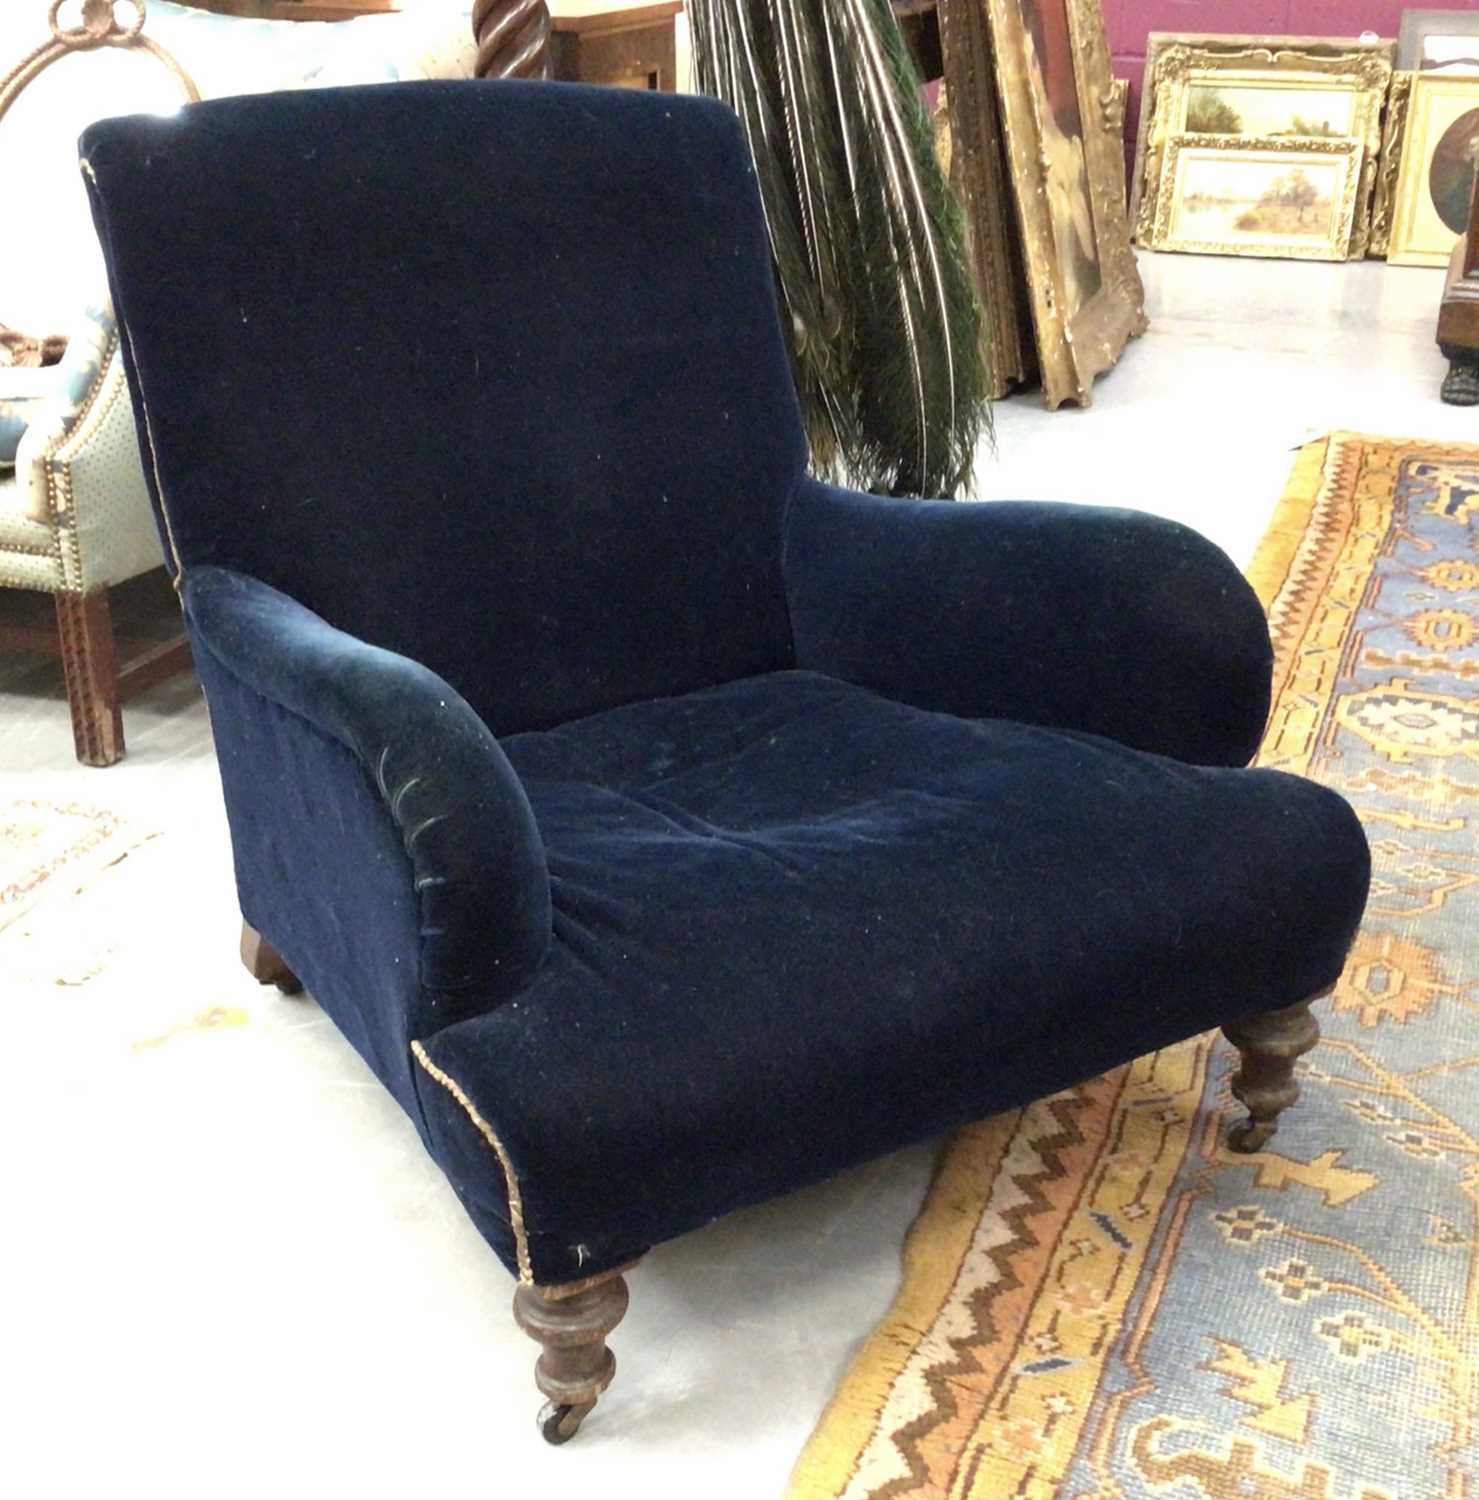 Late 19th / early 20th century oak upholstered deep armchair in the manner of Howard & Sons